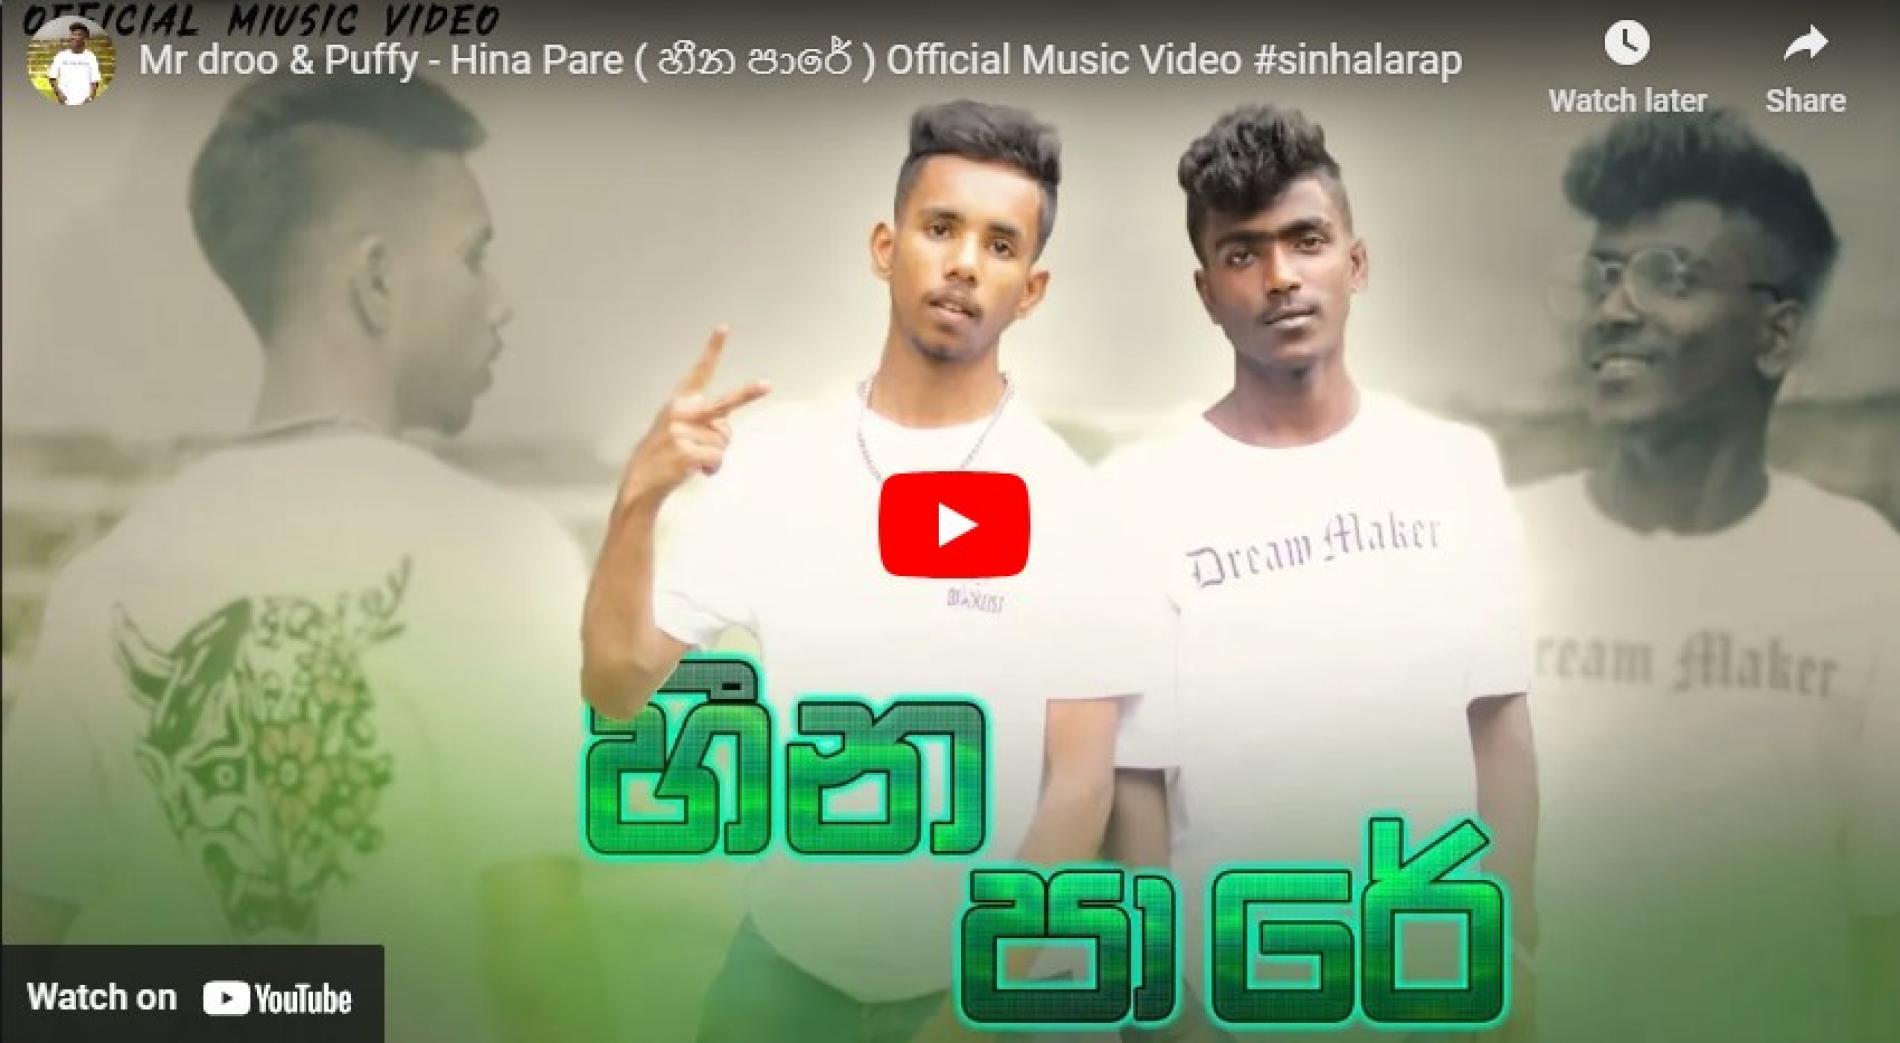 New Music : Mr droo & Puffy – Hina Pare ( හීන පාරේ ) Official Music Video